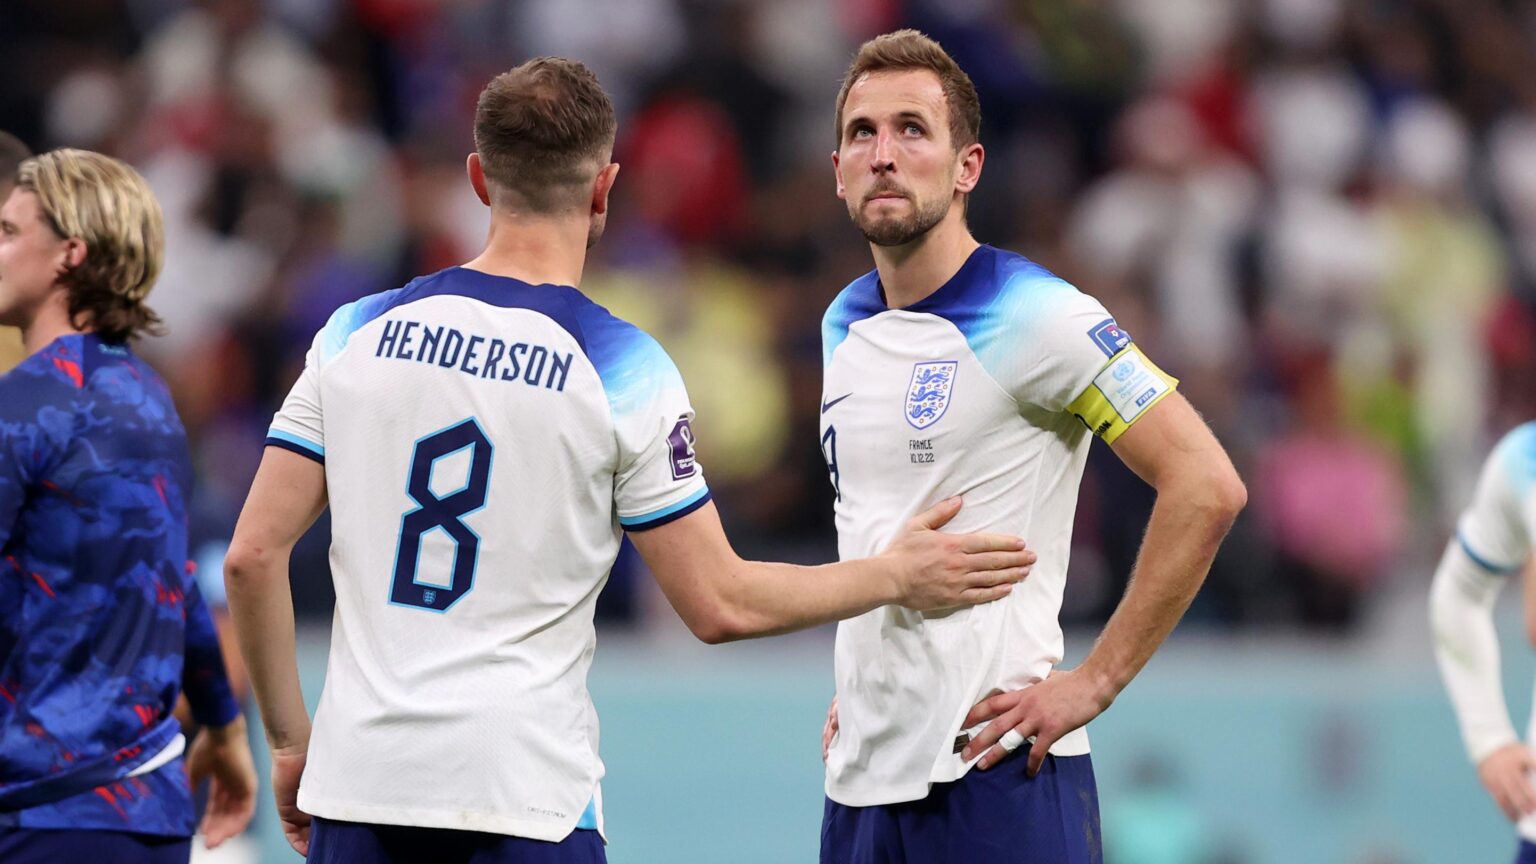 Sunday Papers – England out of World Cup despite excellent performance